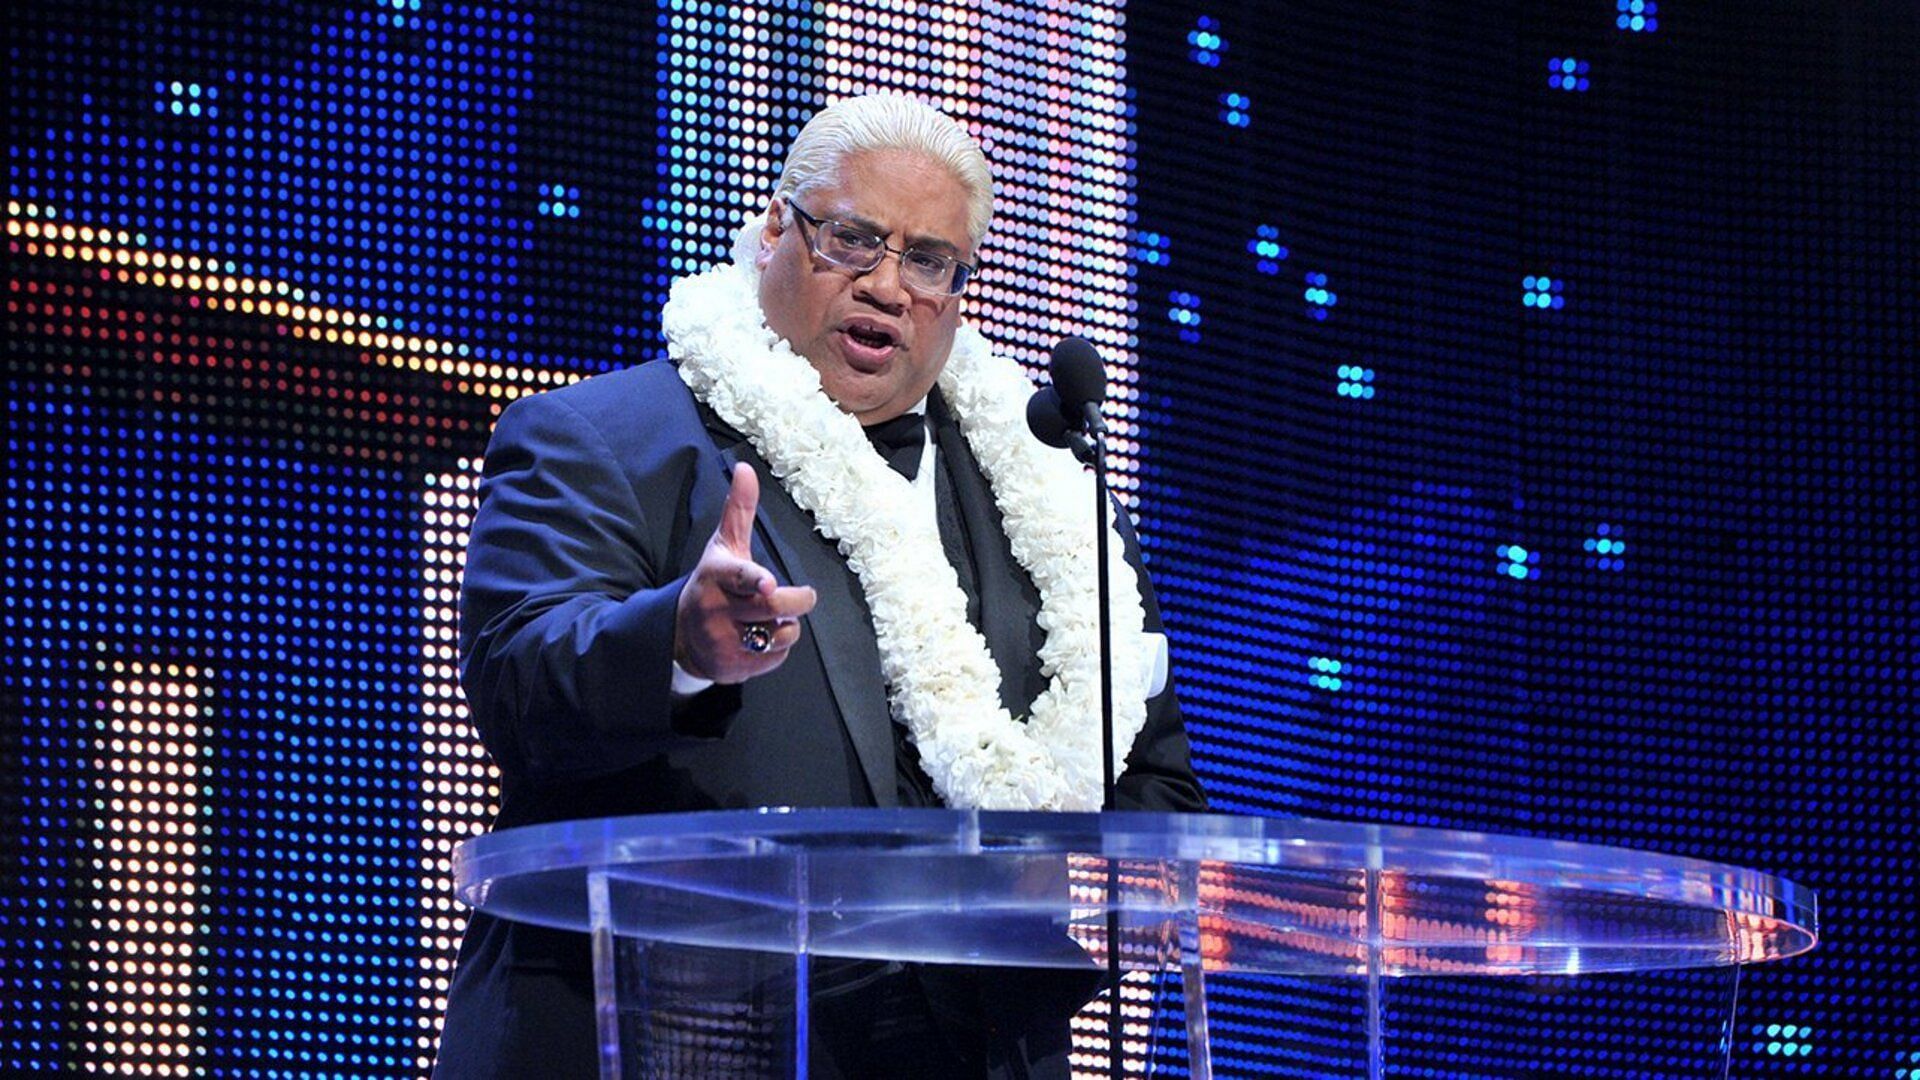 Rikishi is inducted into the WWE Hall of Fame, Class of 2015